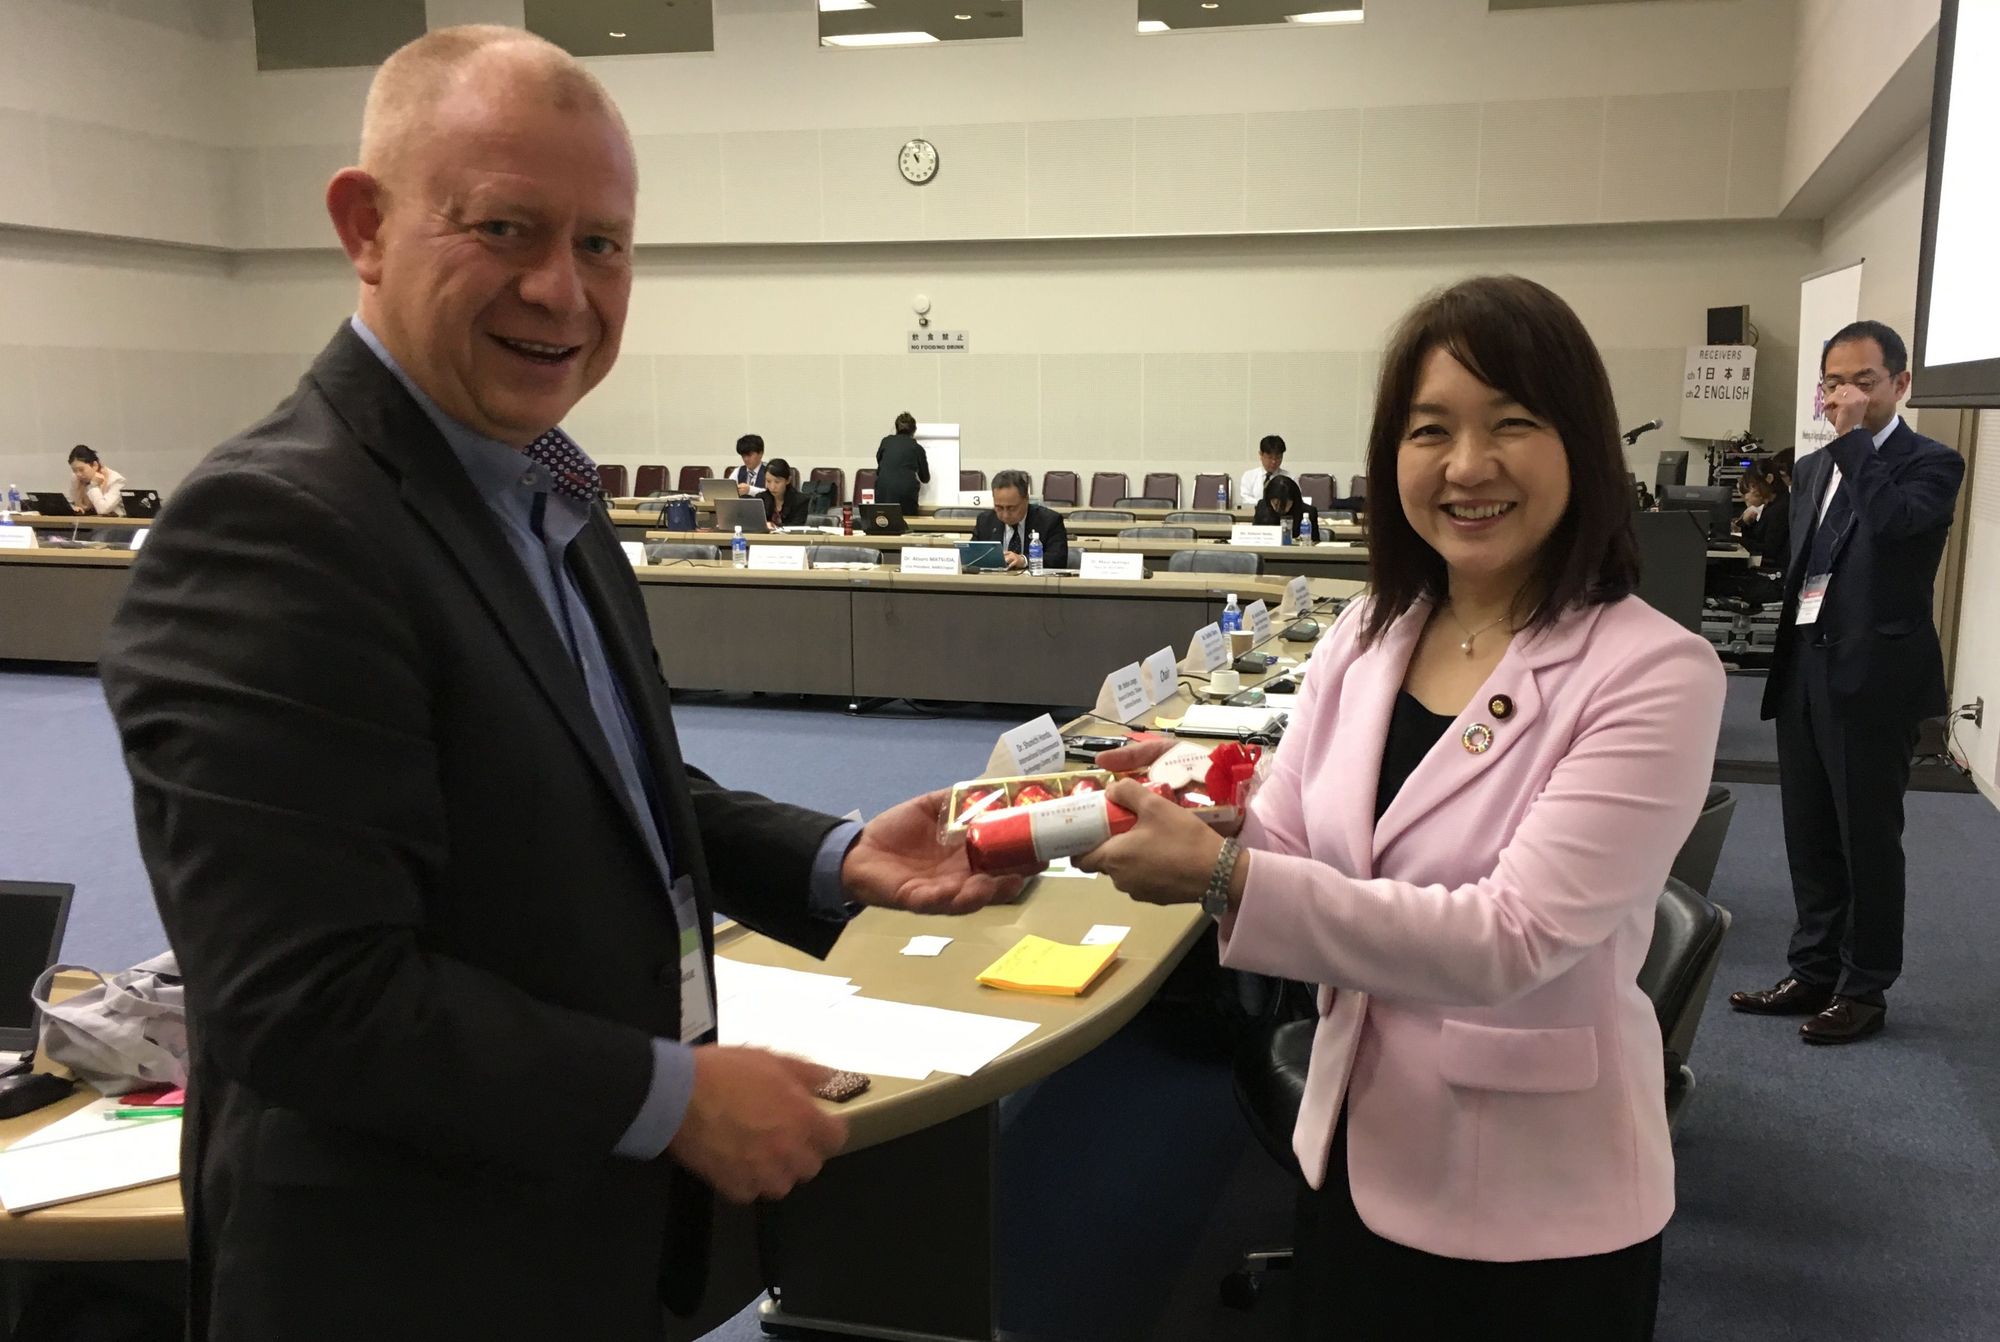 Mr. Stefan Lange, Research Coordinator at Thünen Institute, thanked Ms. Toshiko Takeya, Member of the House of Councillors, for her valuable participation in the FLW workshop and presentated German specialities.